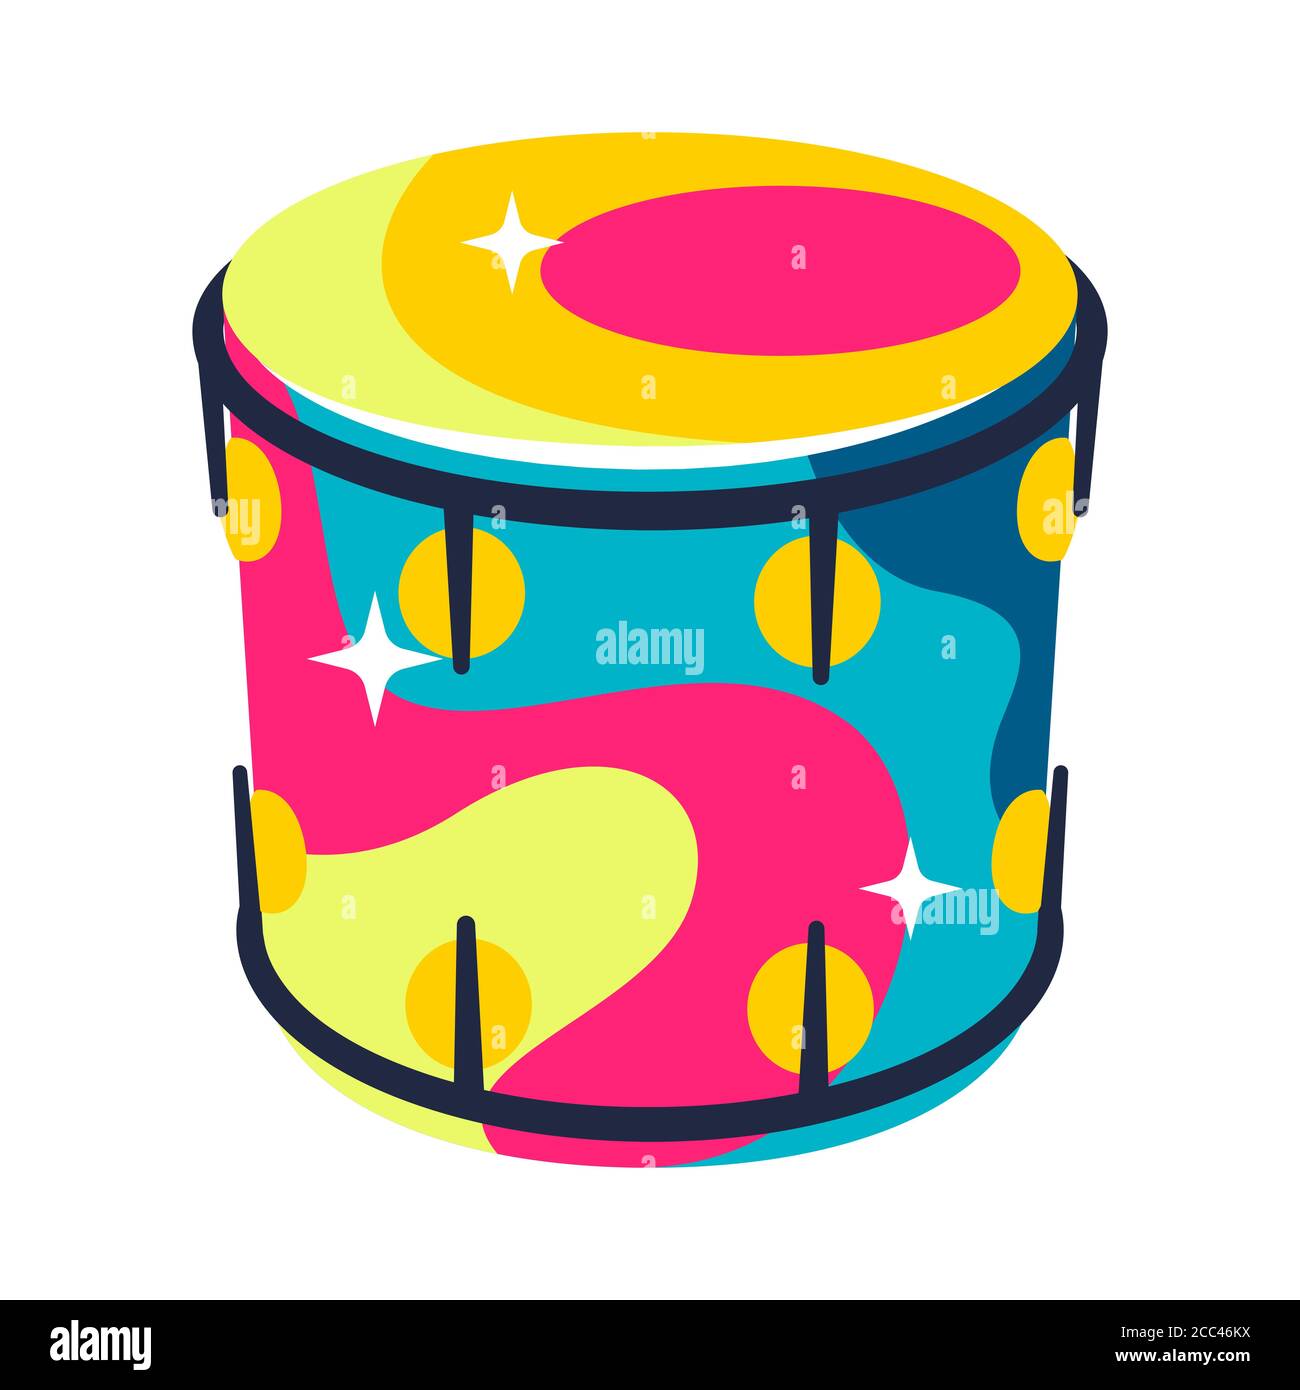 Illustration of musical drum. Stock Vector